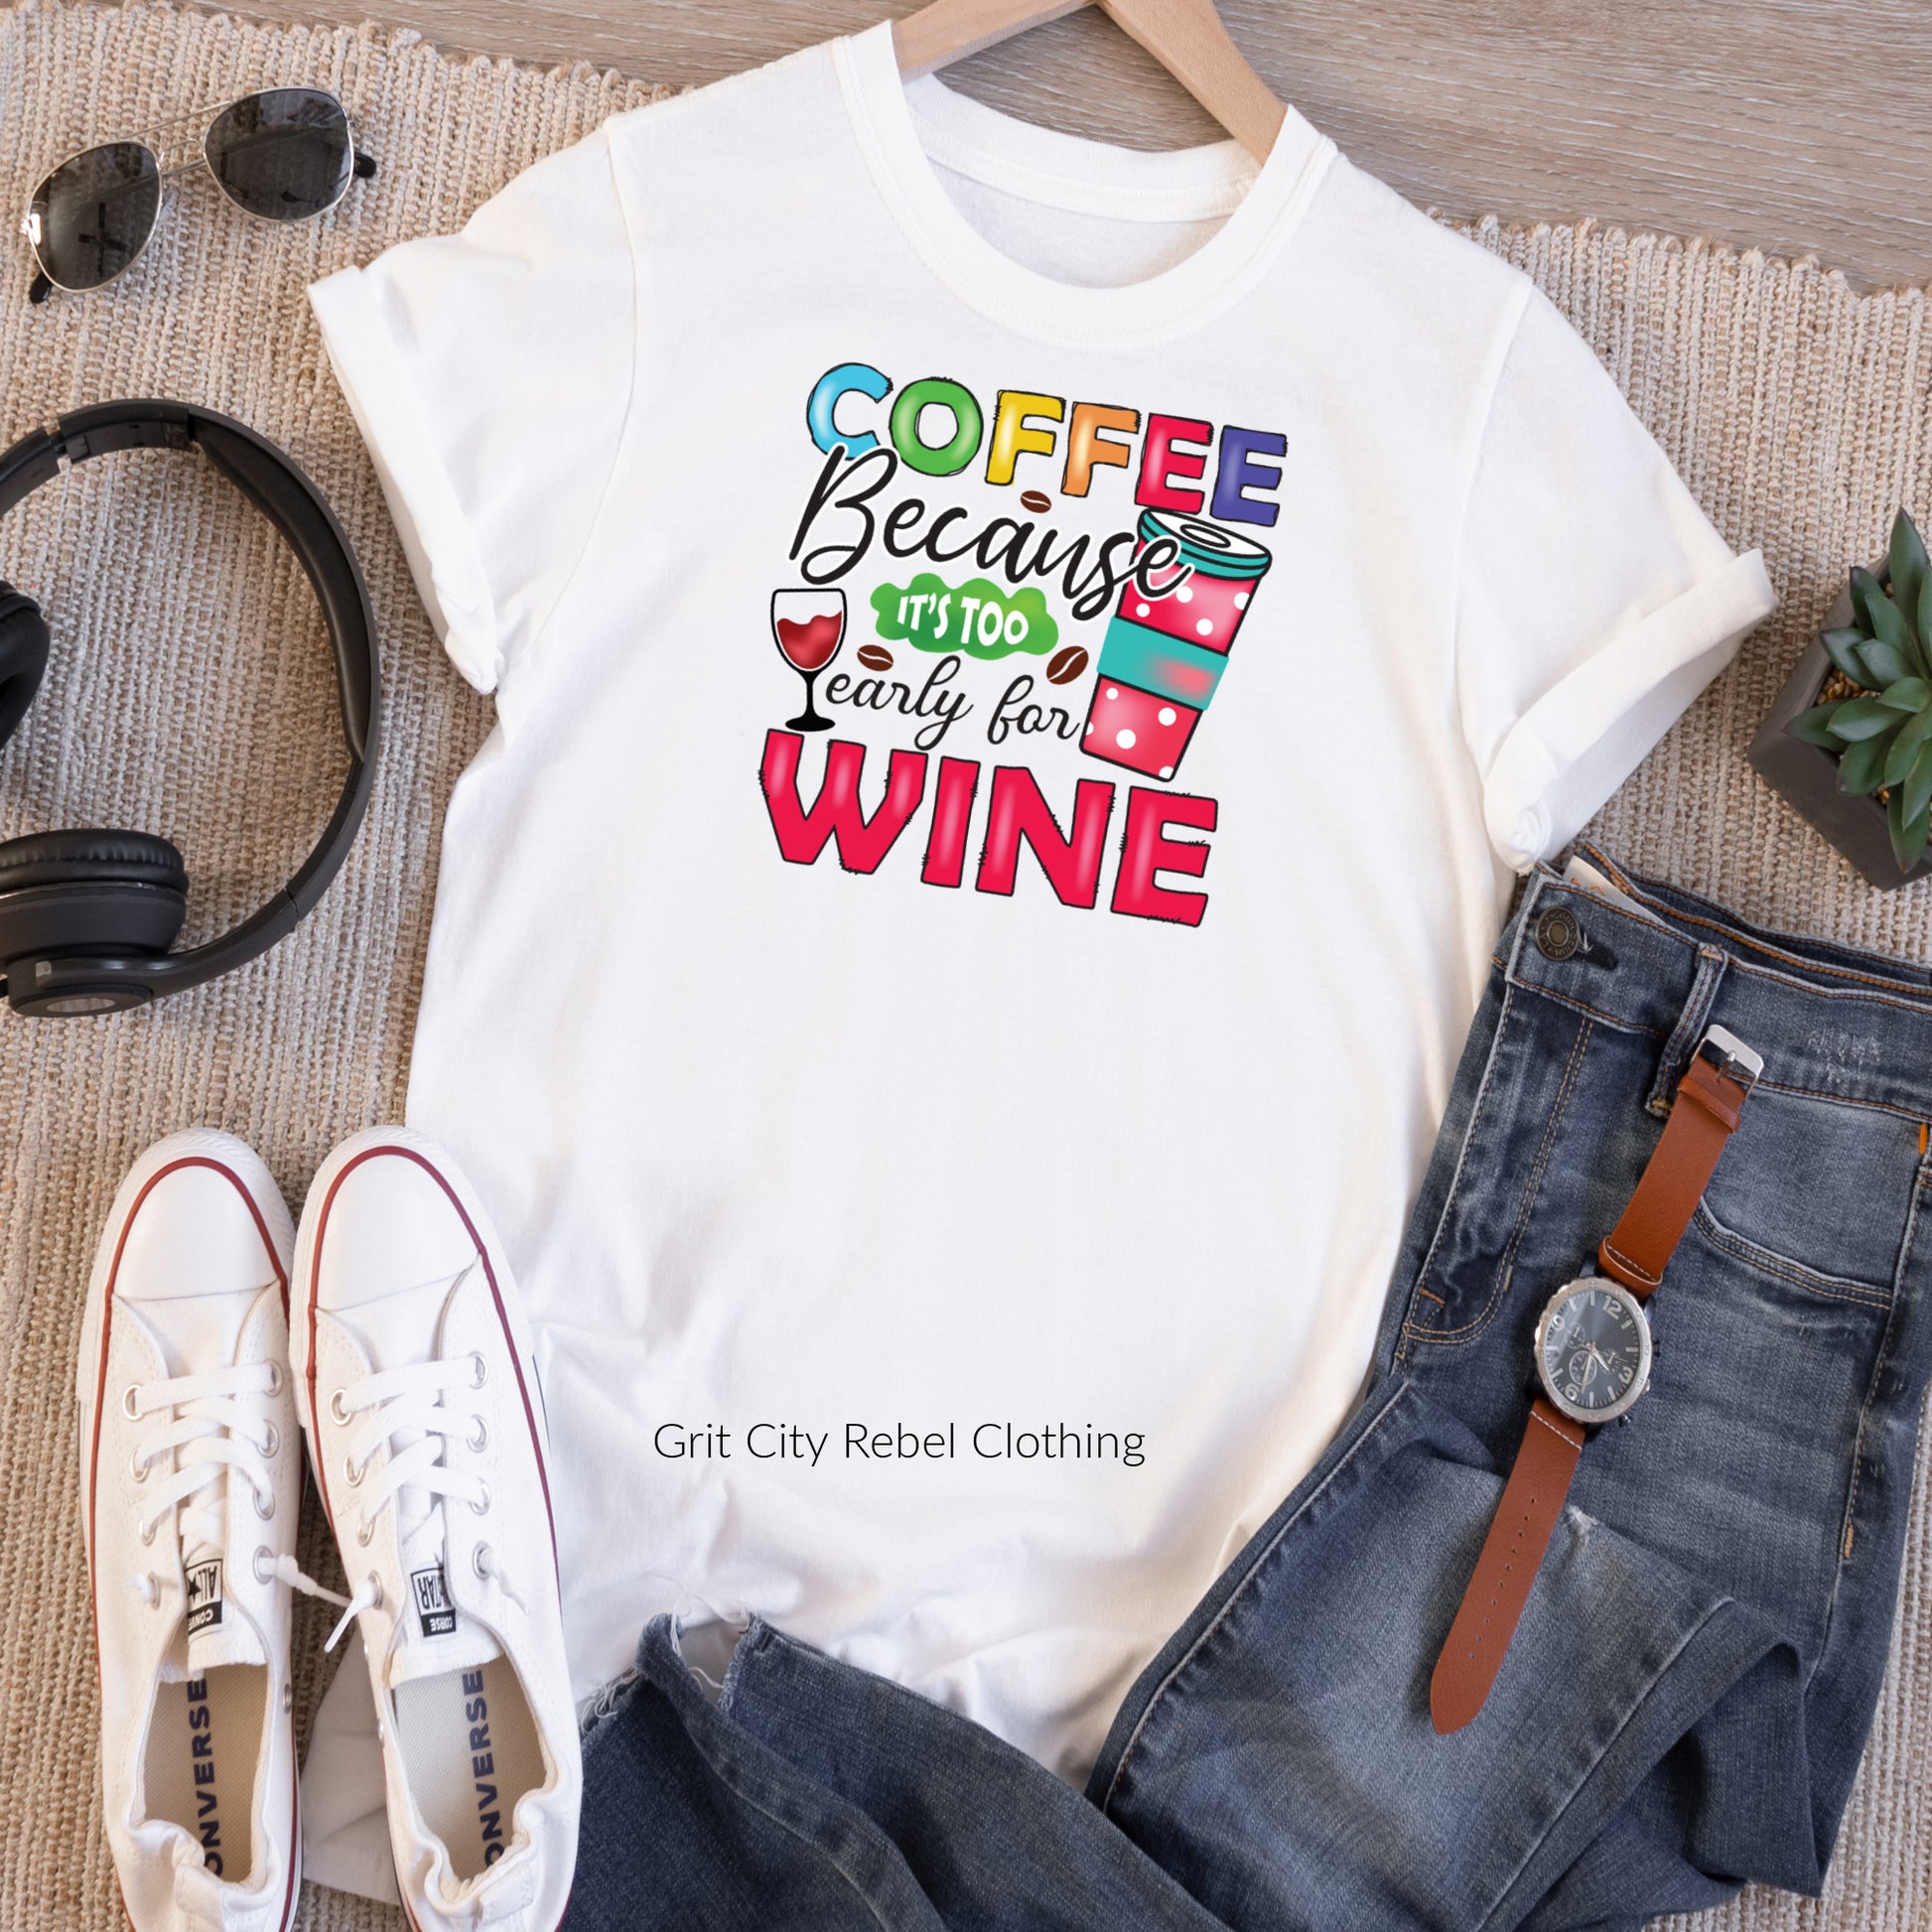 White unisex fit TShirt with a very colorful saying of COFFEE Because It's TOO early for WINE